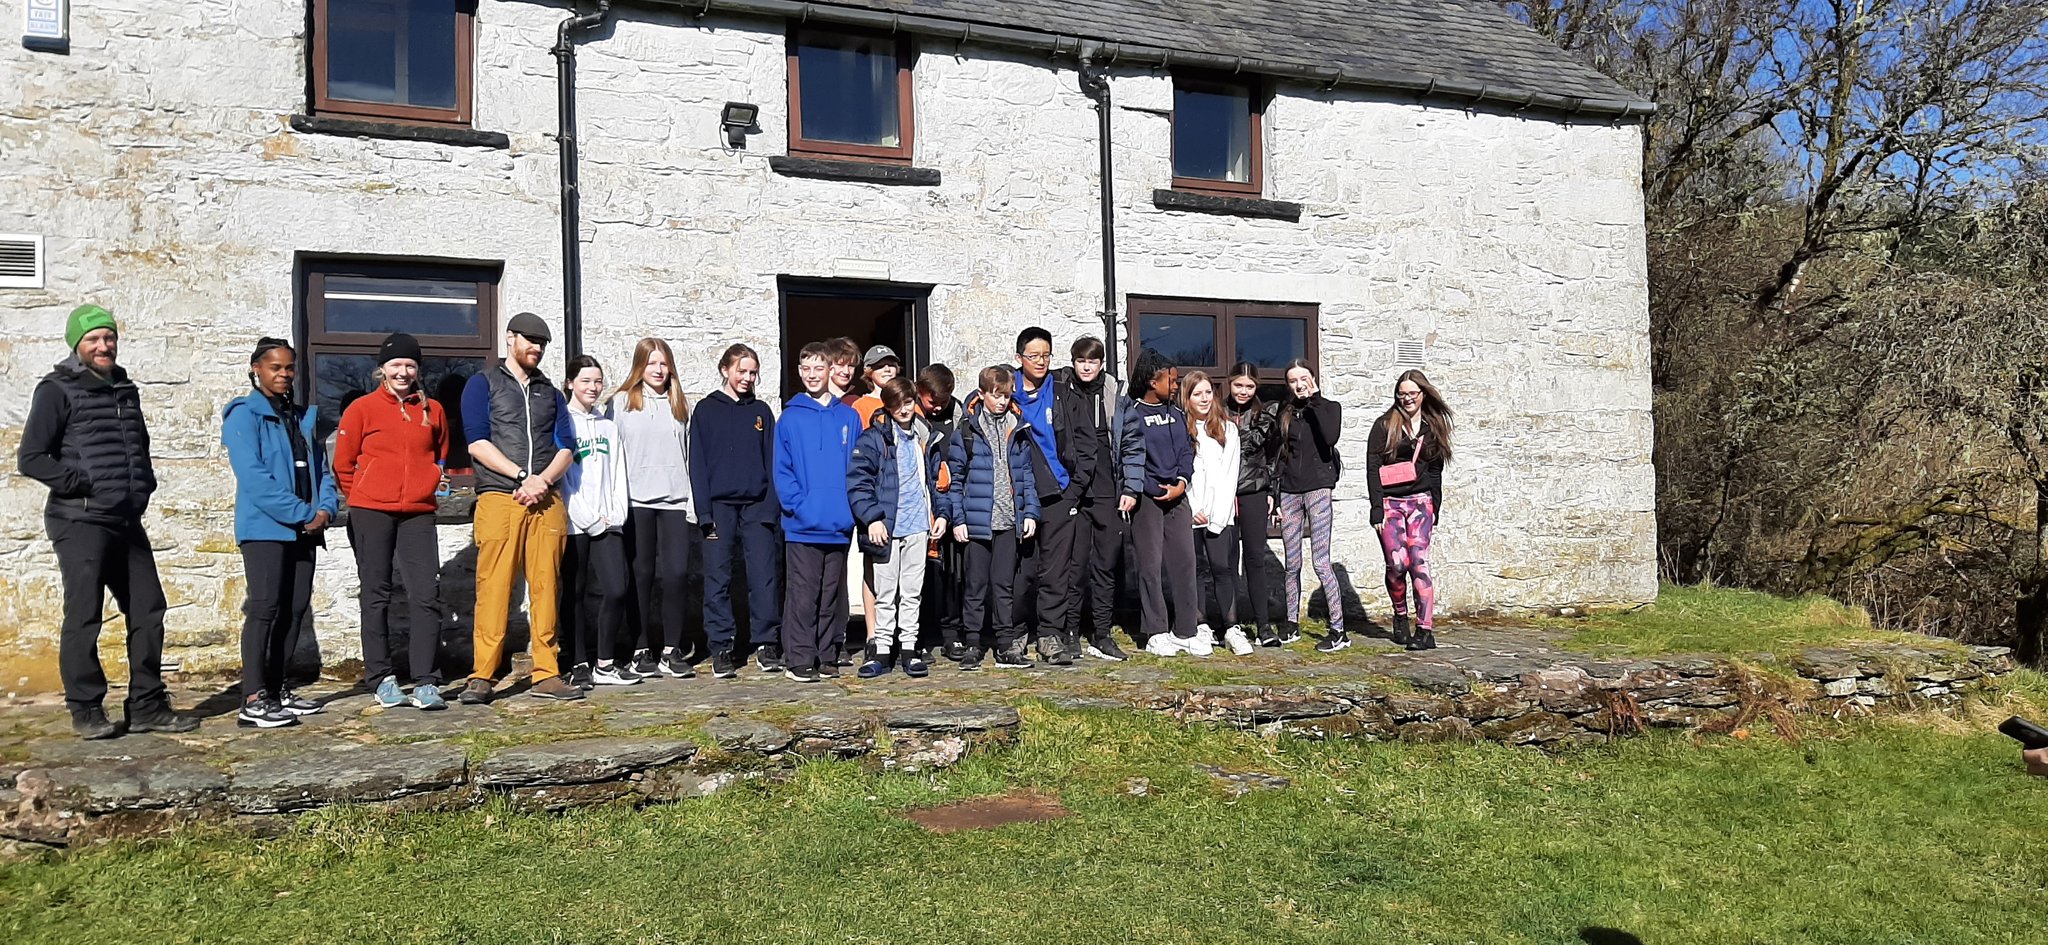 Salopians share first residential trip to Talargerwyn with The Shewsy